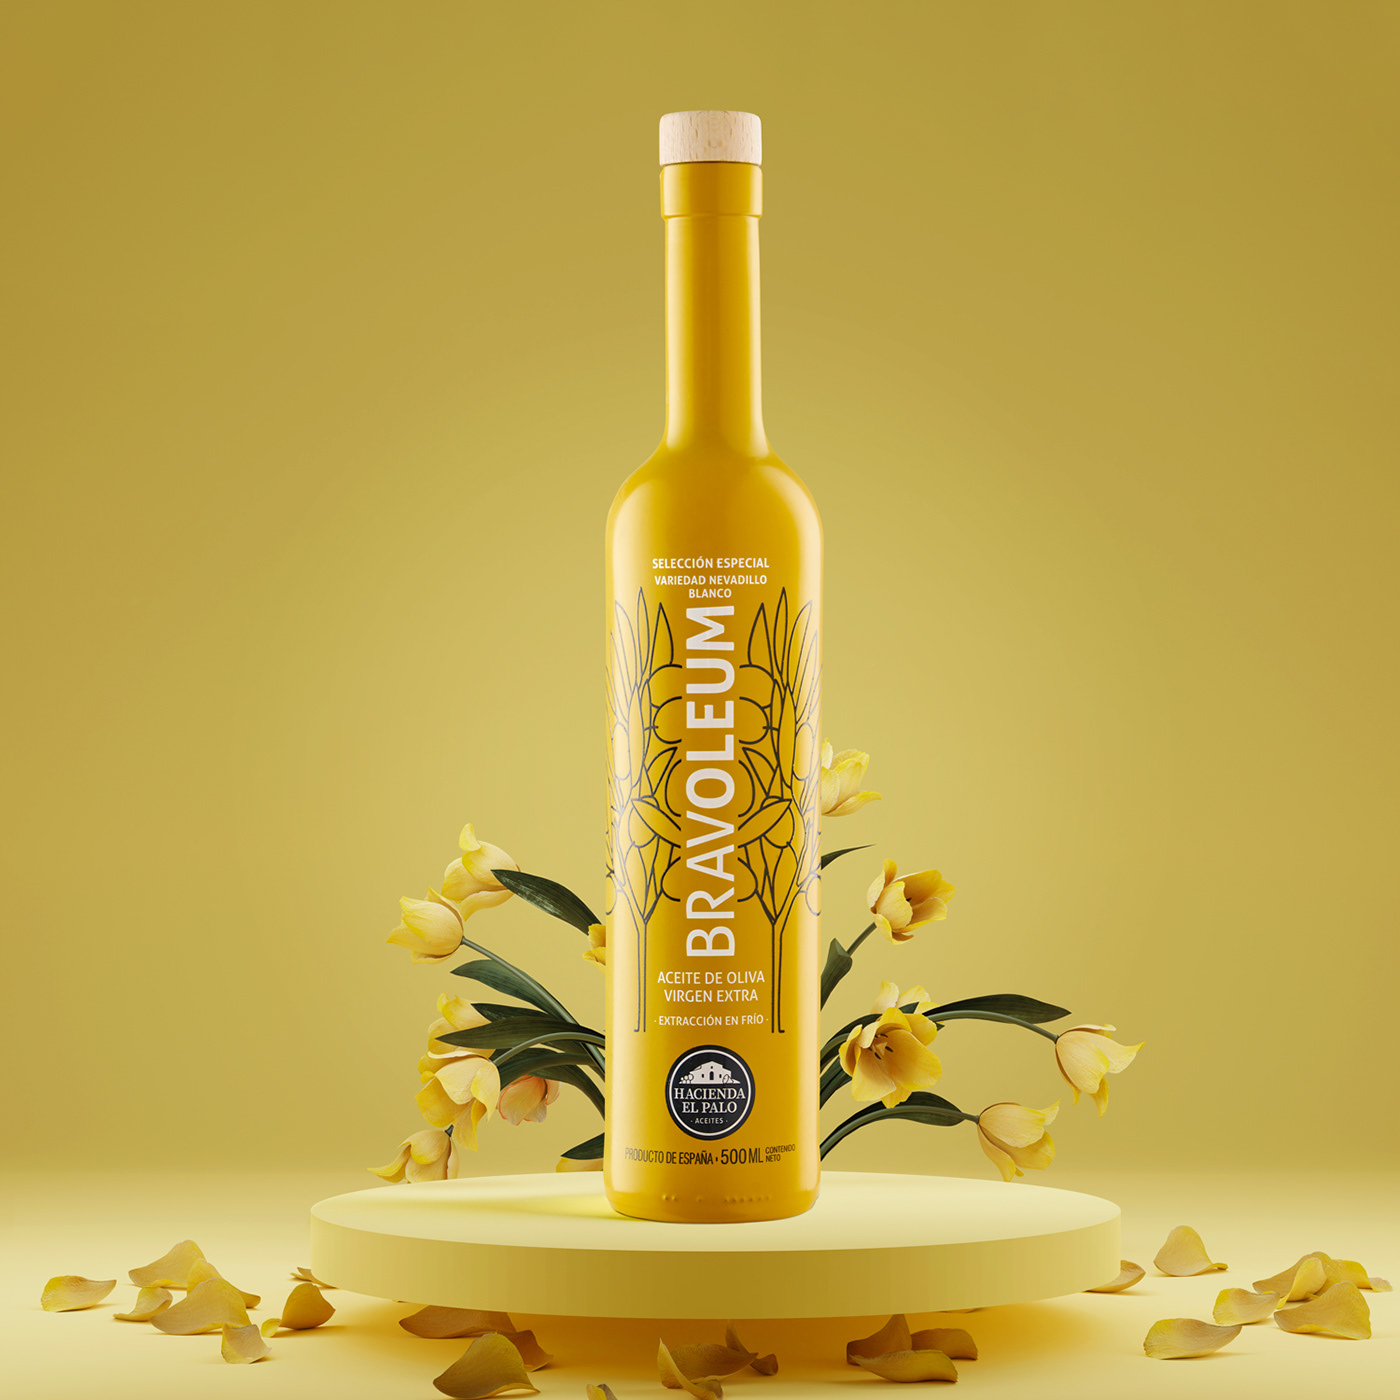 AOVE art direction  Olive Oil Photography  Product Photography set design 